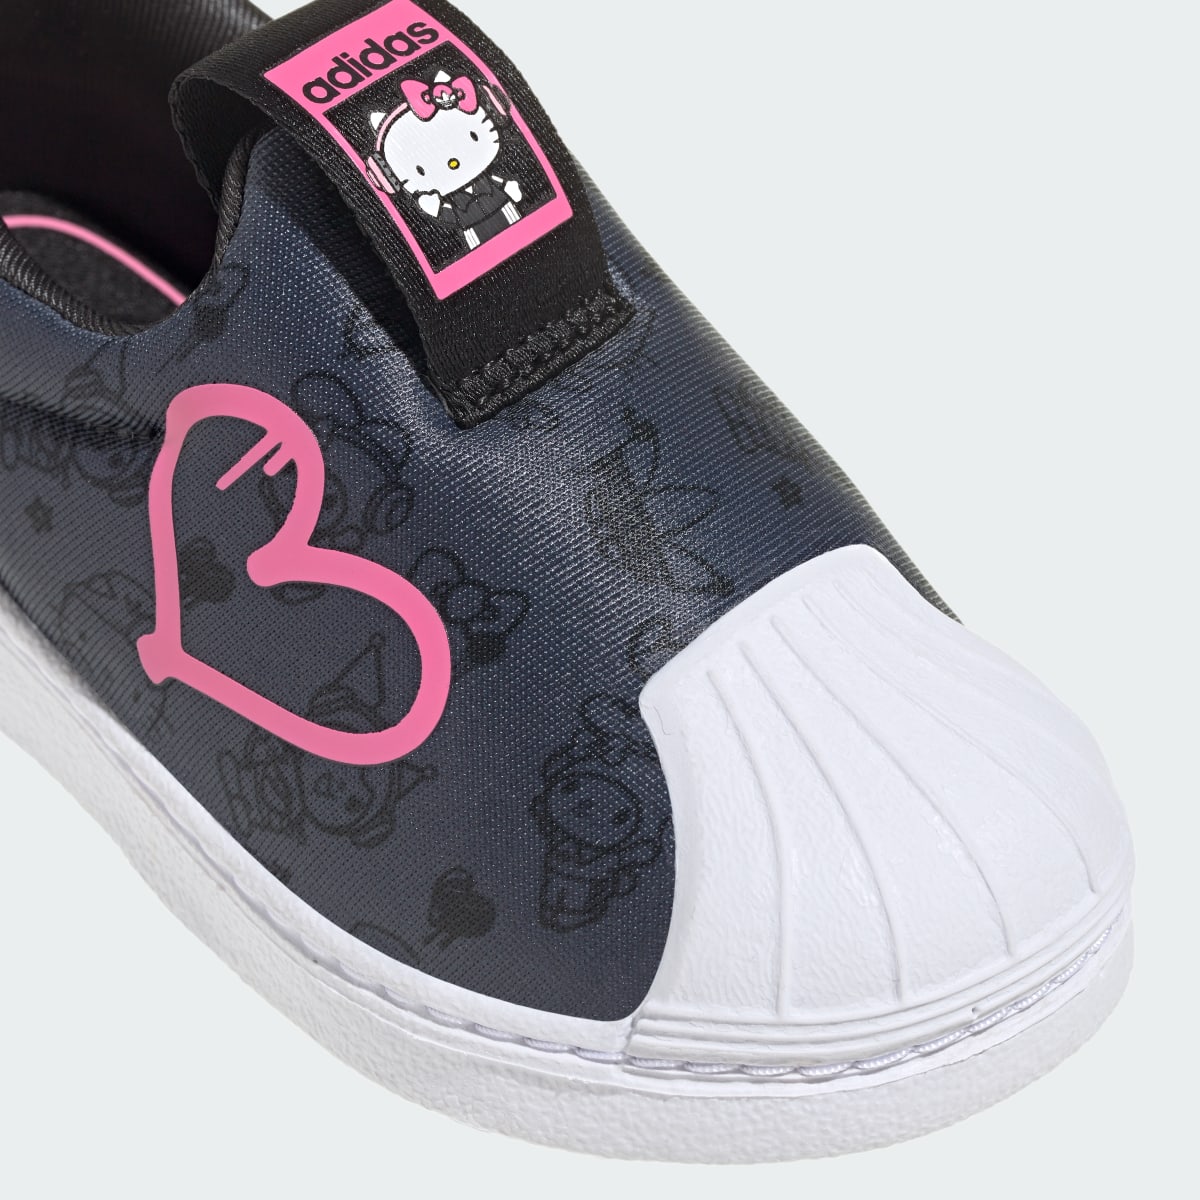 Adidas Originals x Hello Kitty and Friends Superstar 360 Shoes Kids. 10